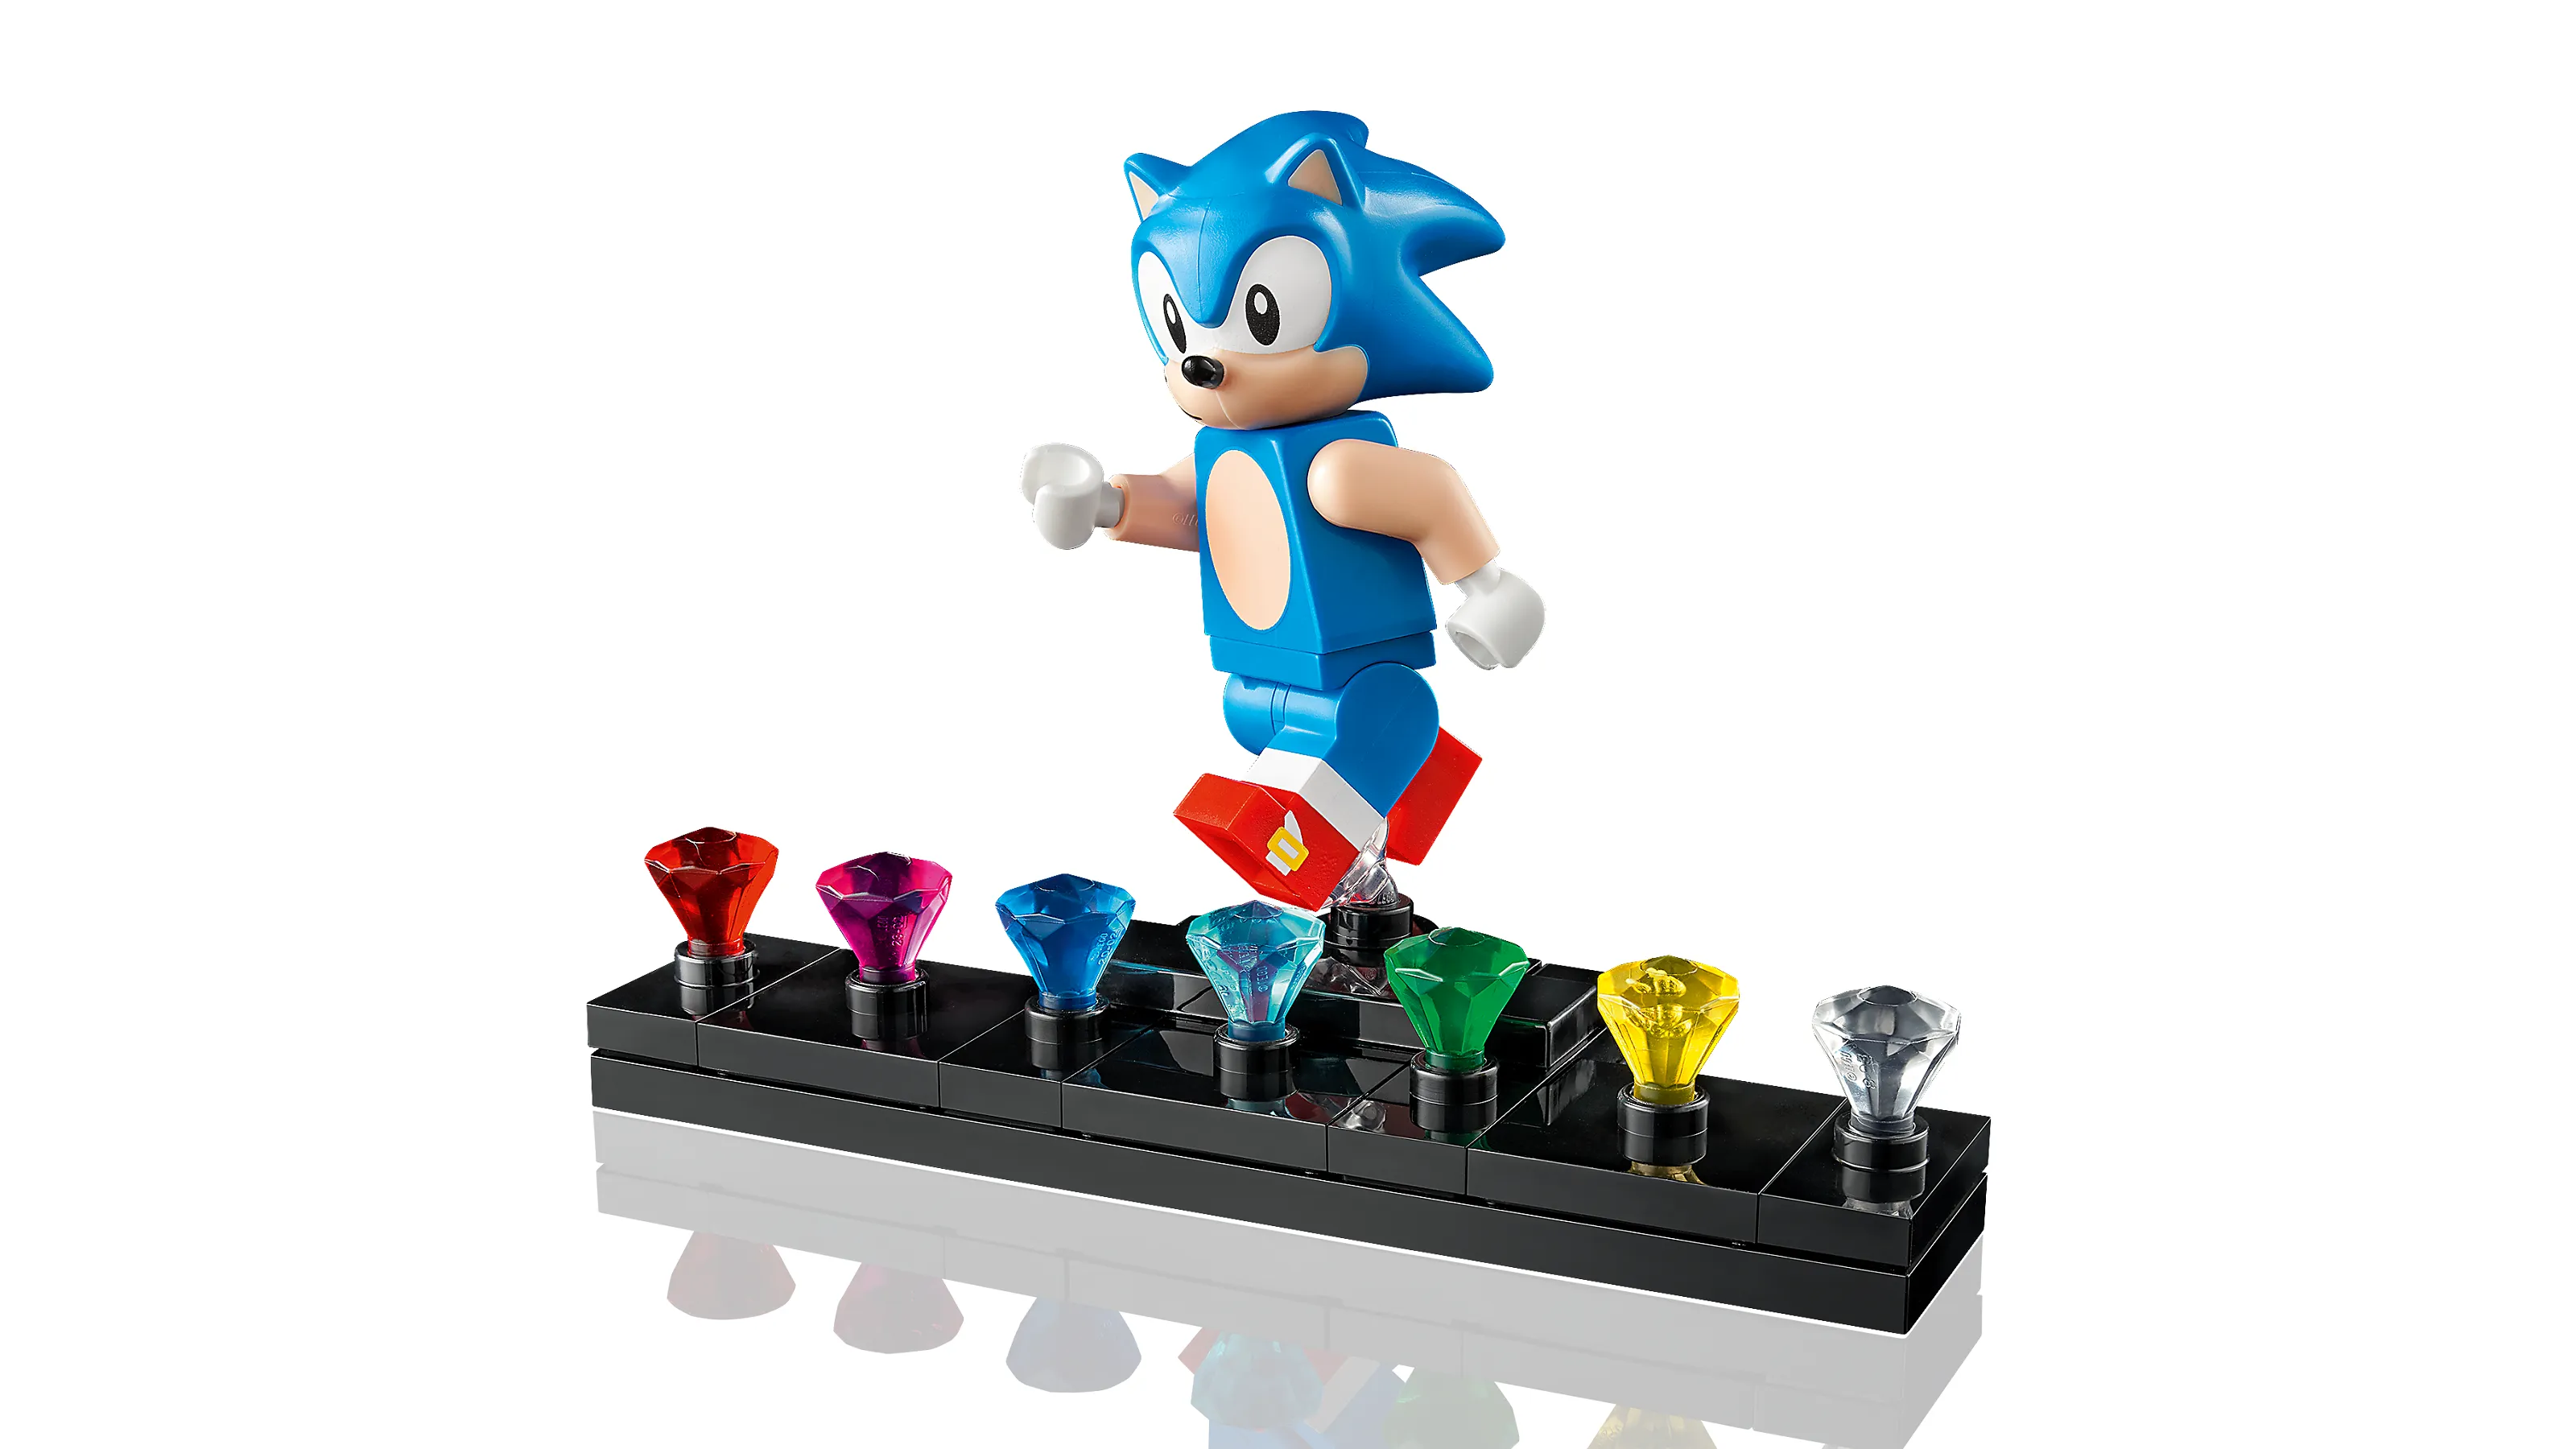 LEGO Ideas Sonic The Hedgehog – Green Hill Zone 21331 Collectible Set,  Nostalgic 90's Gift Idea for Adults with Dr. Eggman Figure and Eggmobile :  Toys & Games 